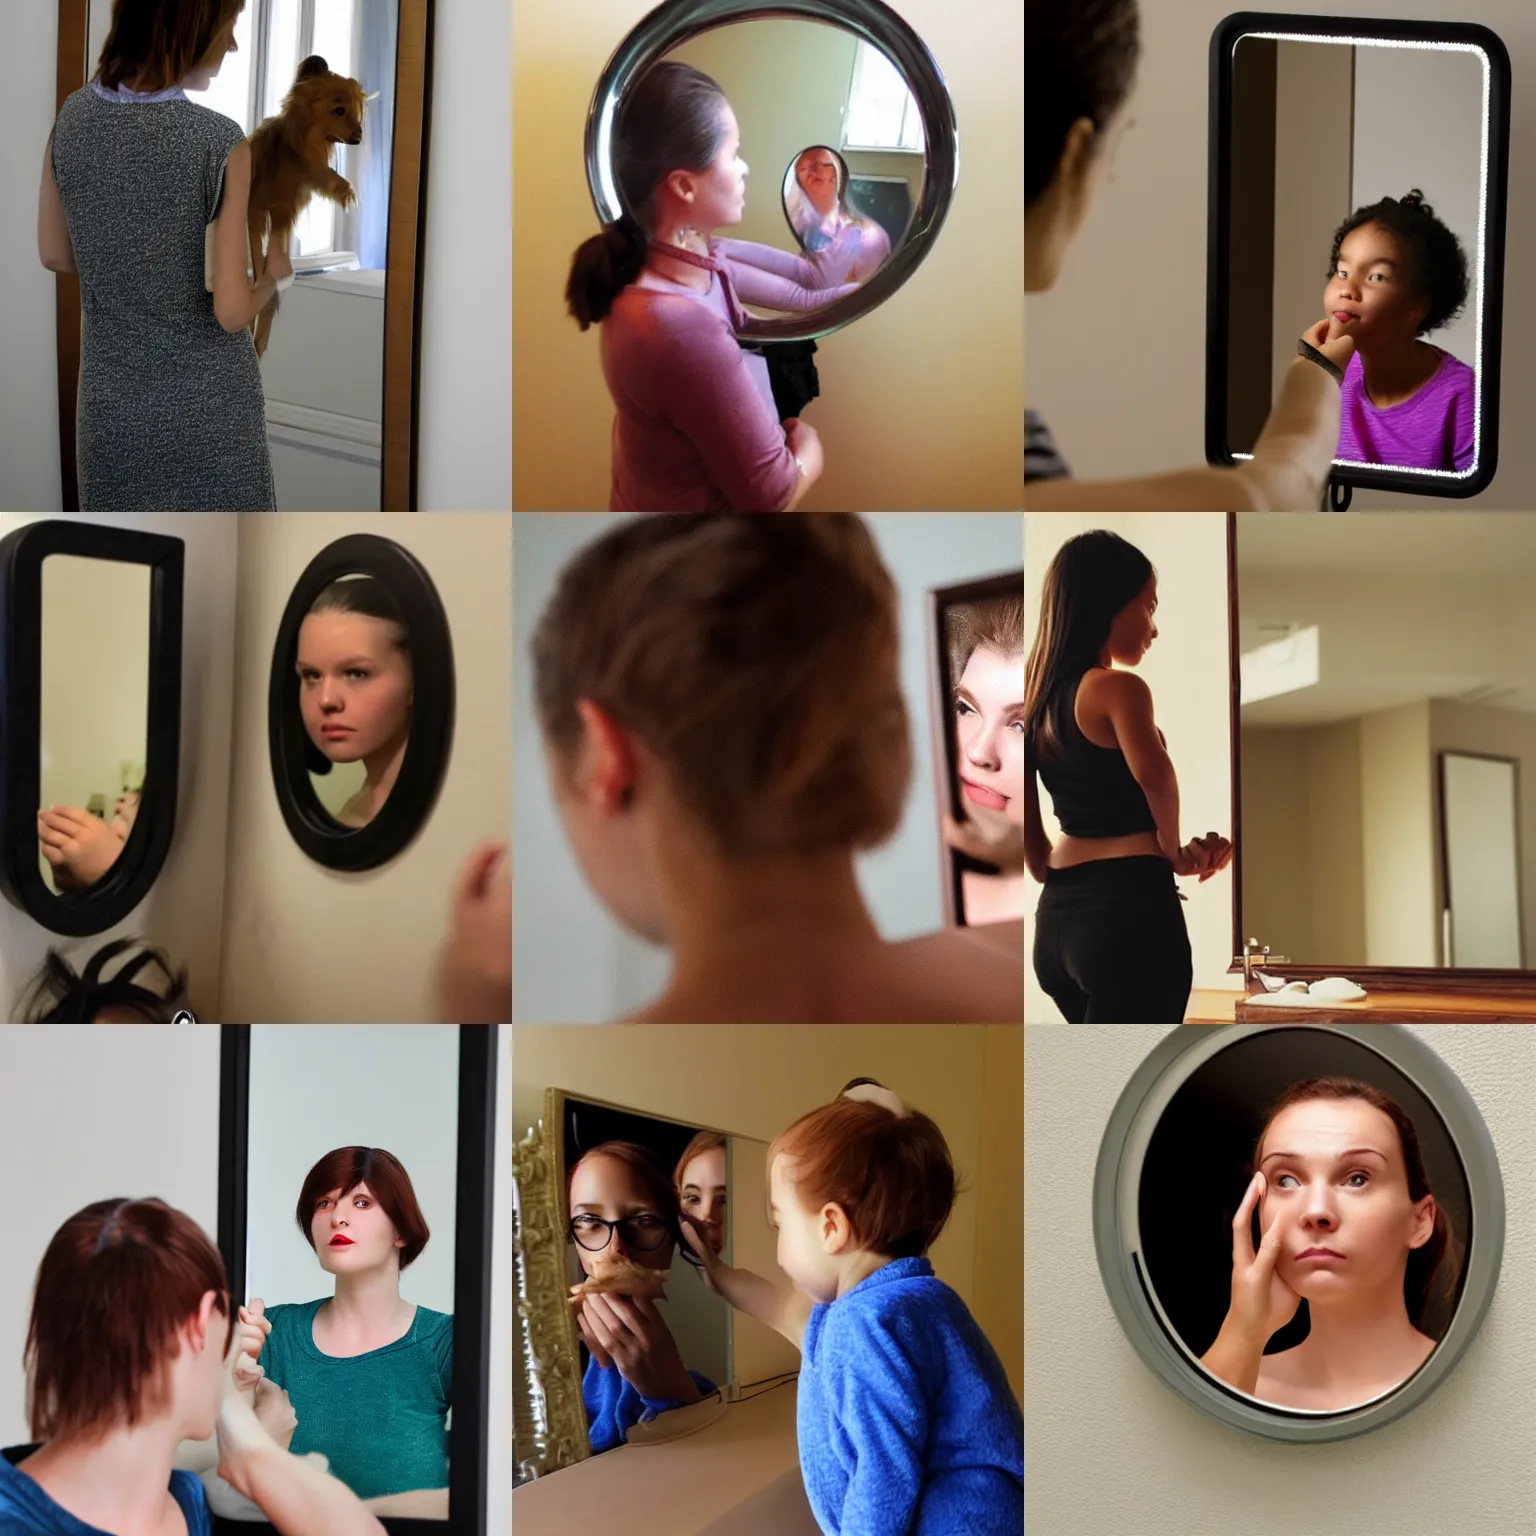 Prompt: she sees her reflection in the mirror, she knows it is good